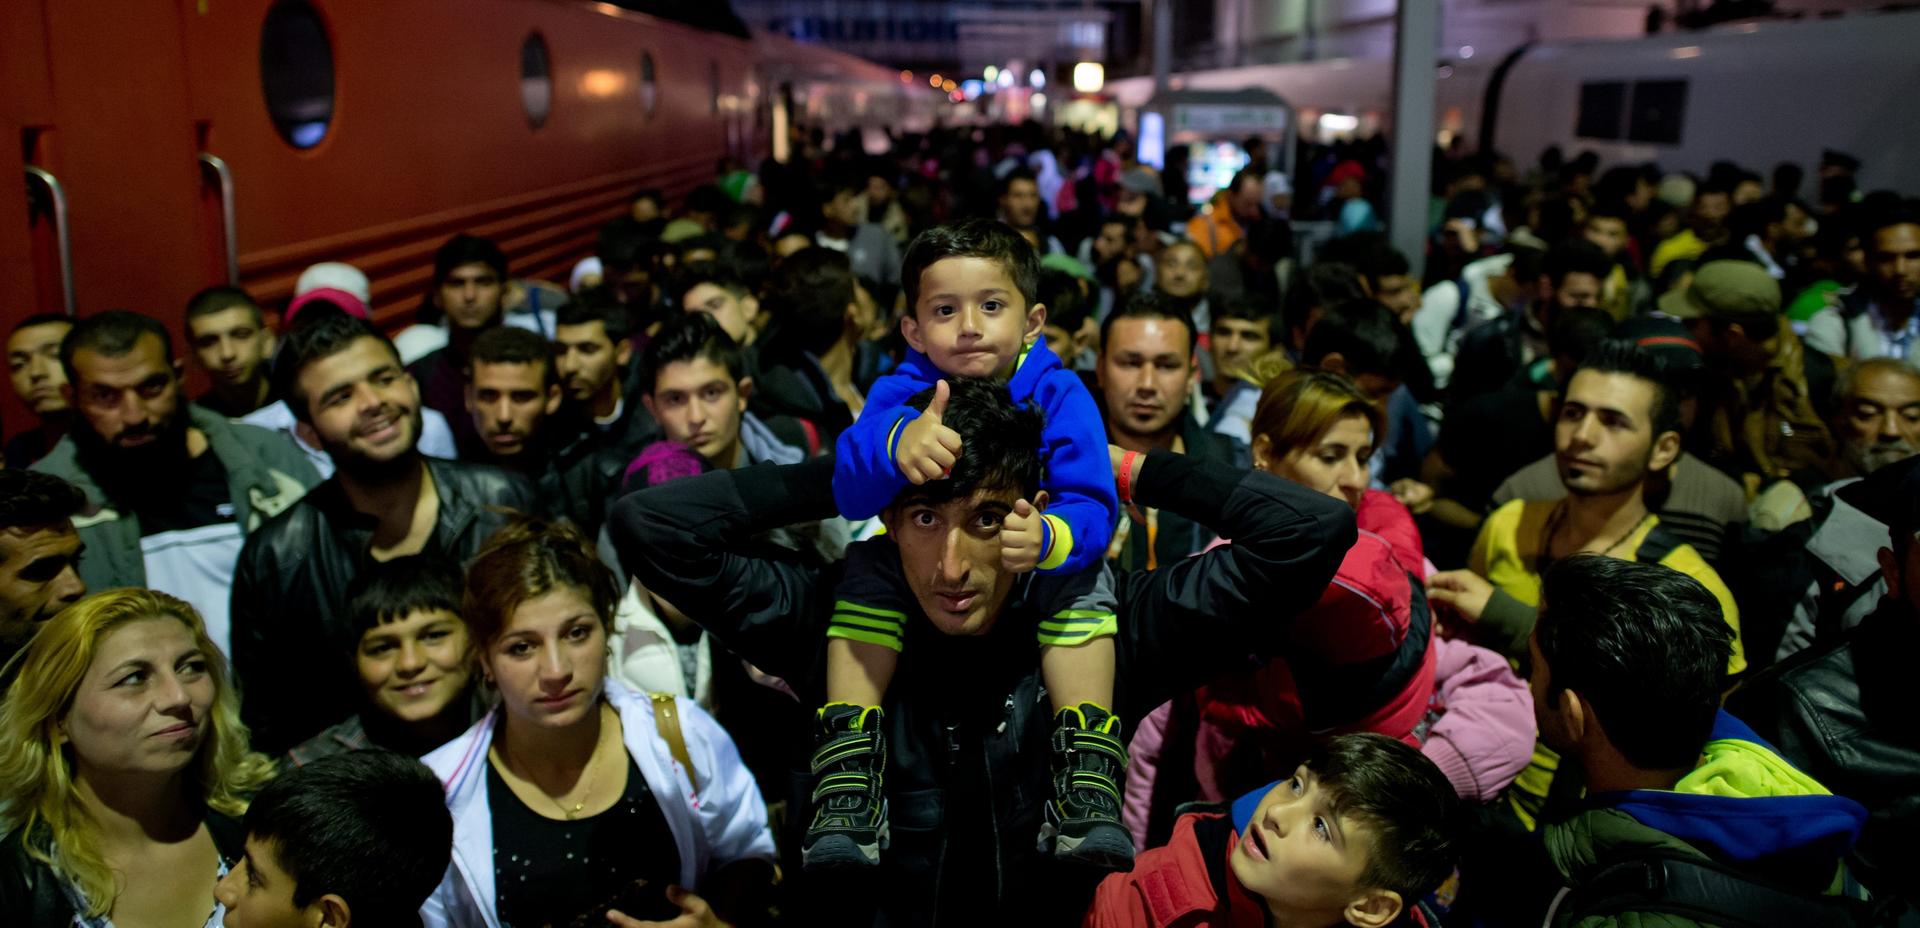 Refugees crowd the platform at the station in Munich.